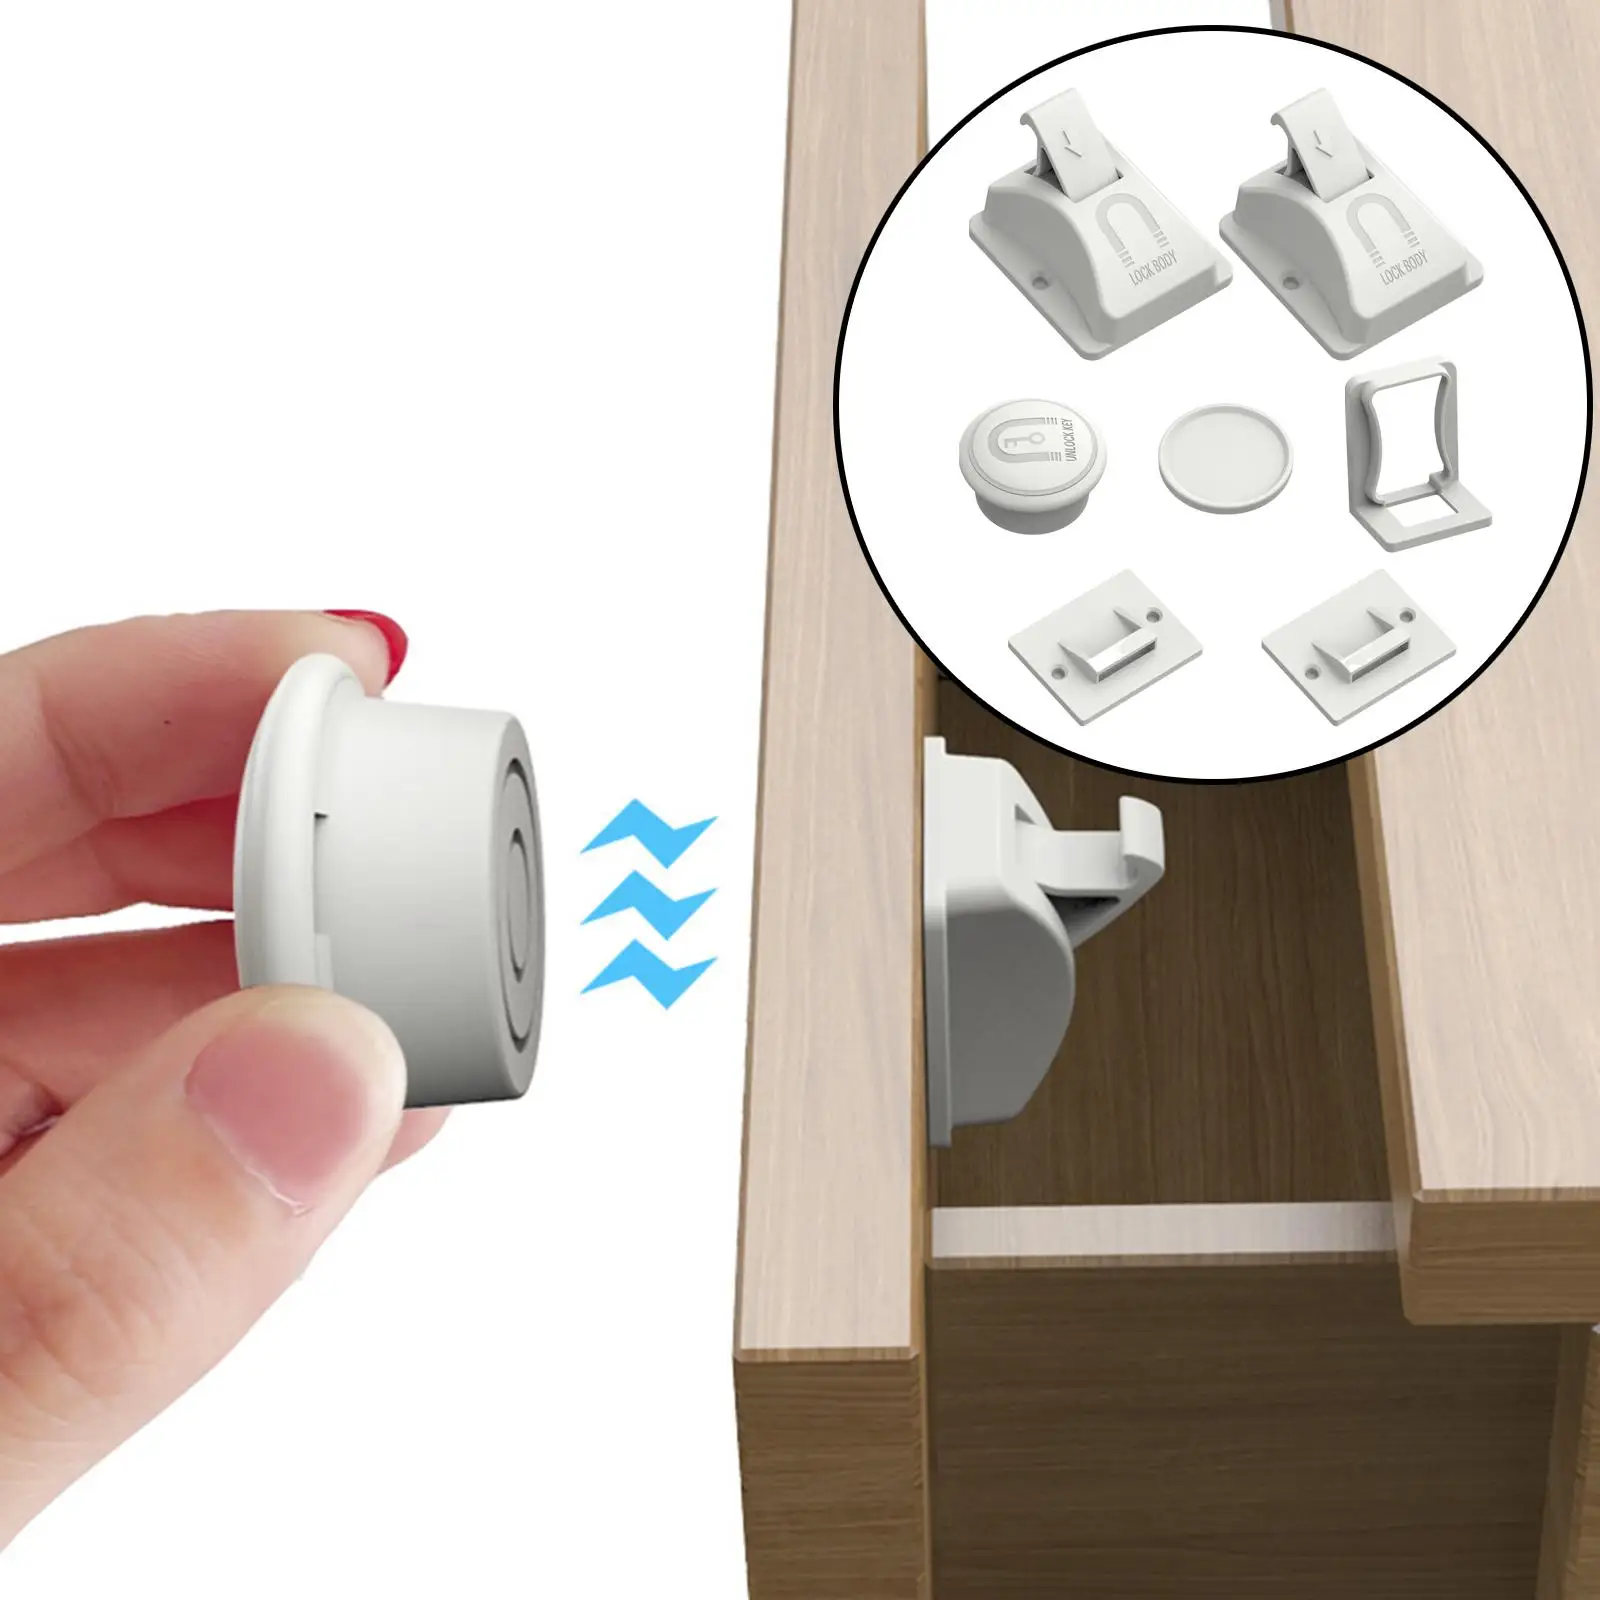 Magnetic Cabinet Locks for Babies No Drilling or Tools Required 2 Pack and 1 Key